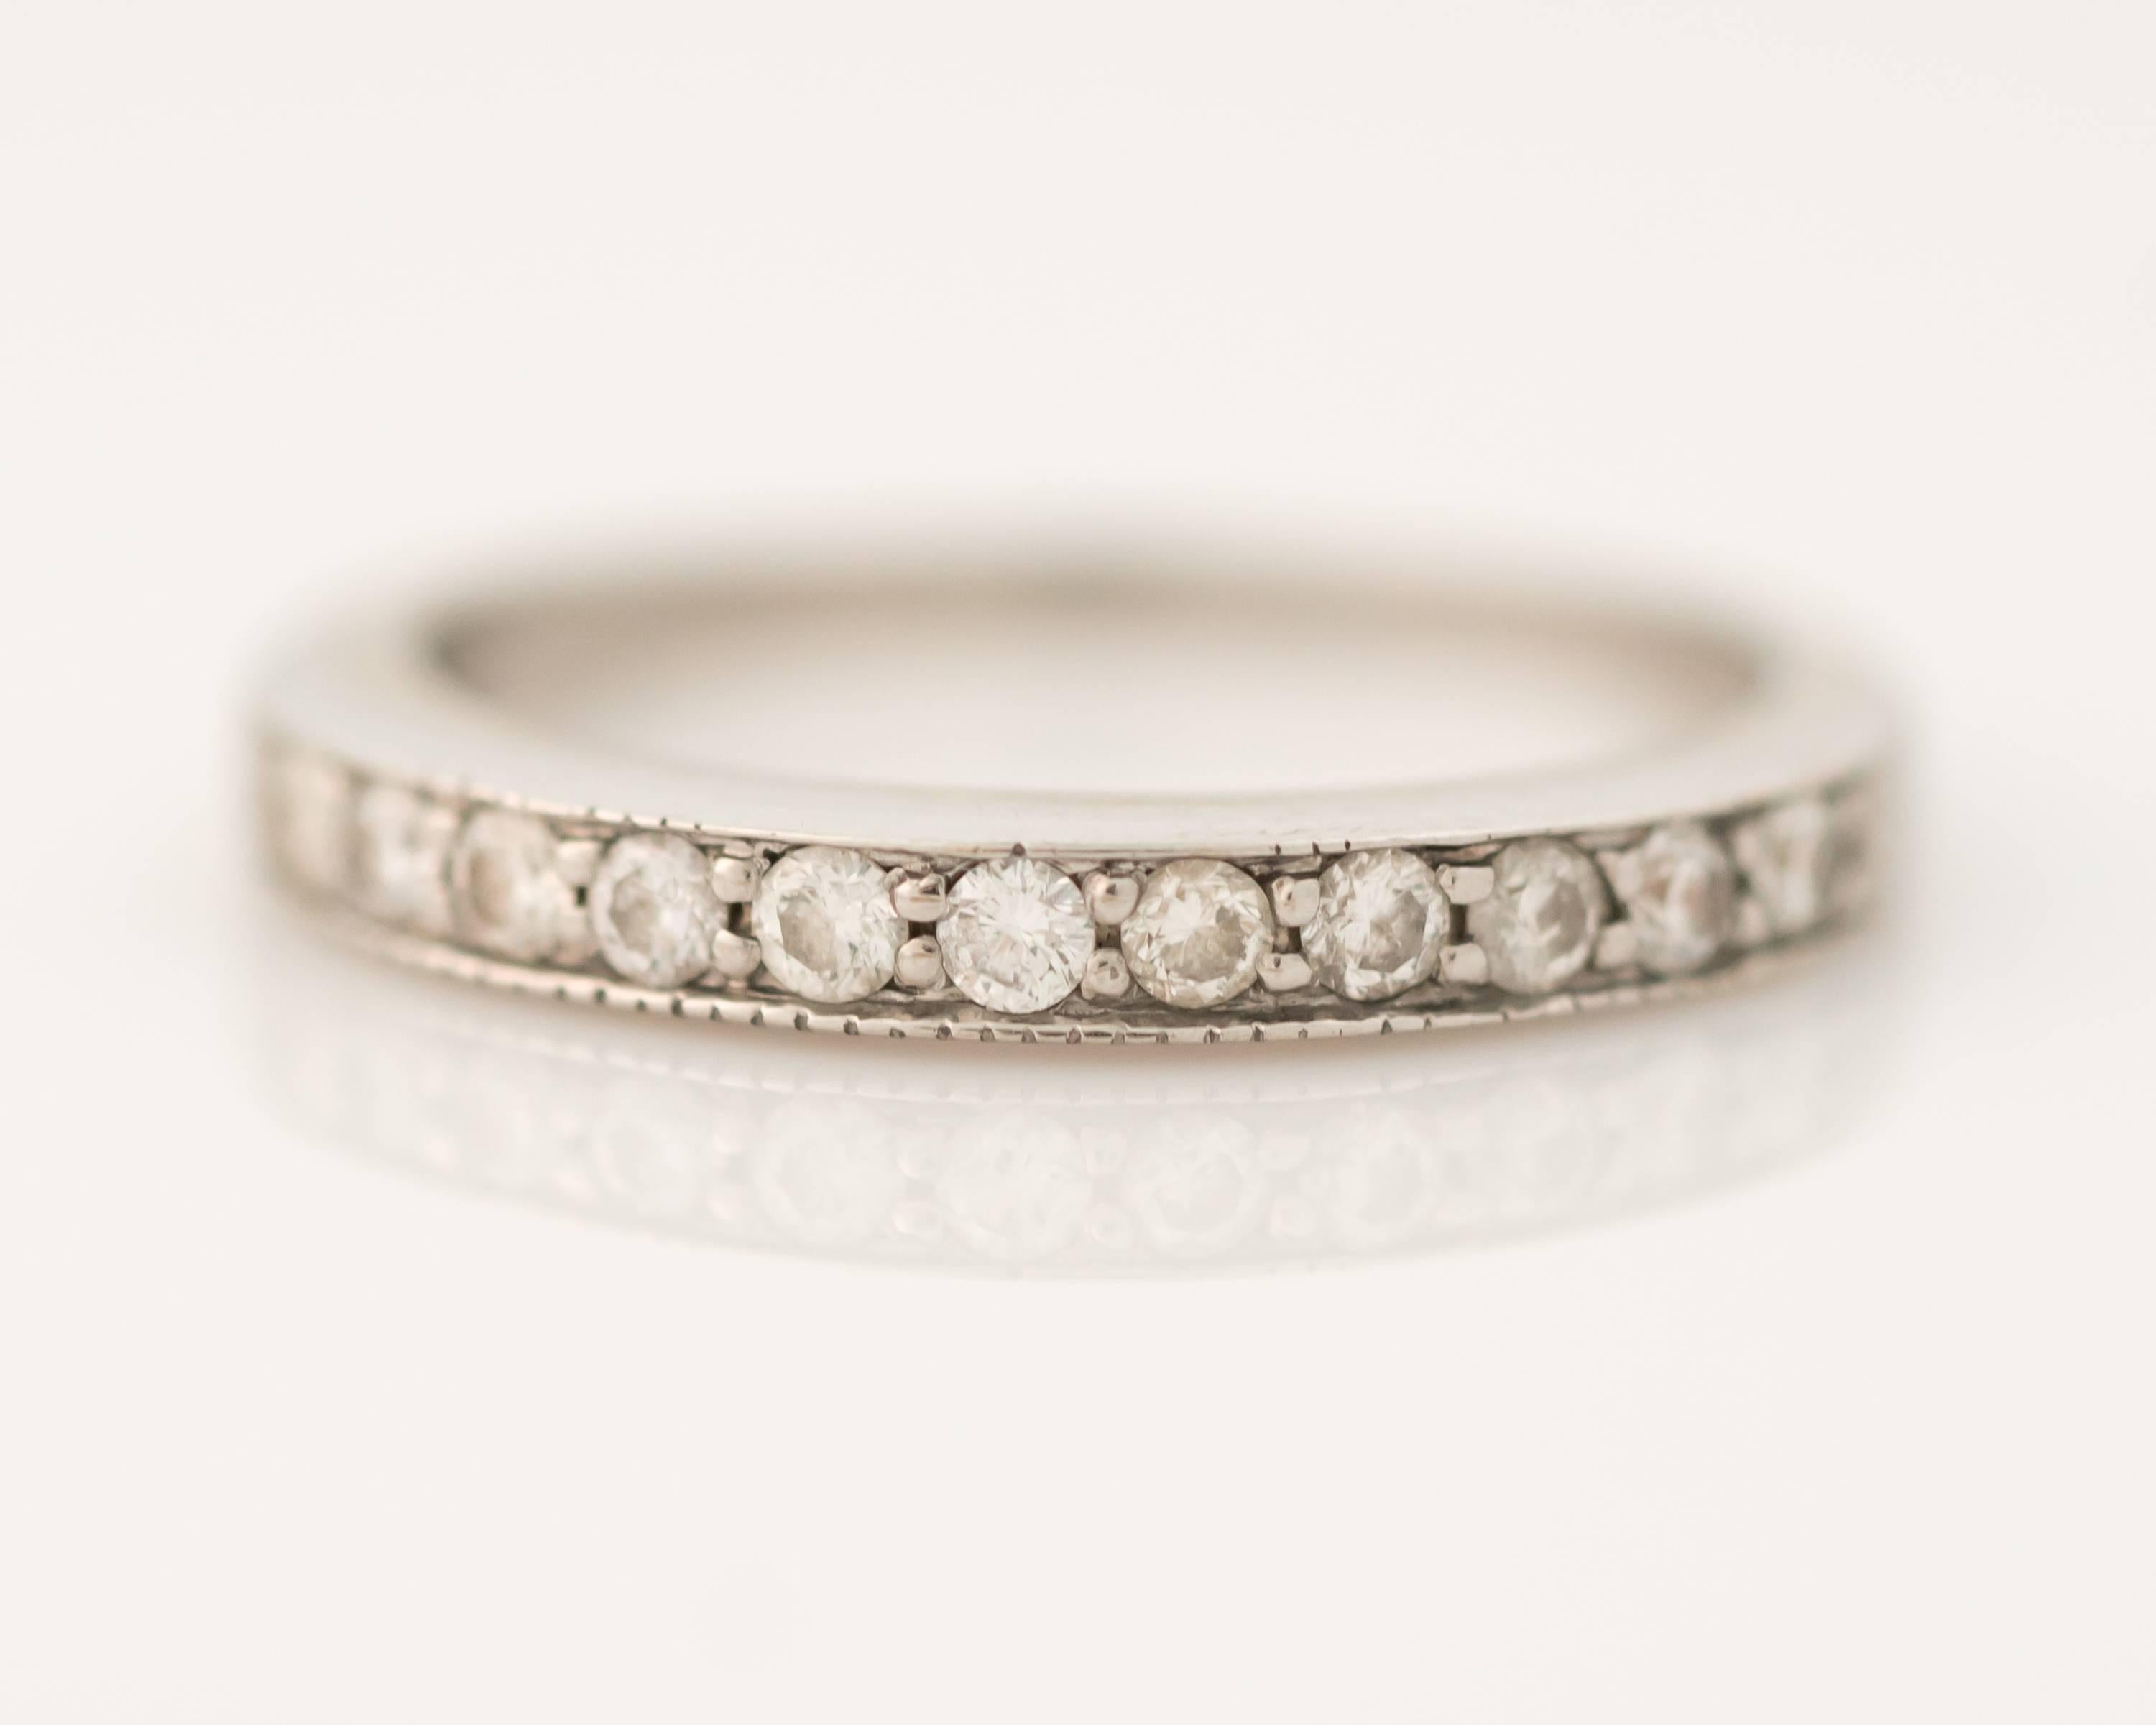 This Diamond and 14 karat white gold halfway around Eternity Band ring looks great with everything! The shank of this lovely ring features .25 carats of prong set round brilliant diamonds along the front half of the ring. The smooth back half of the